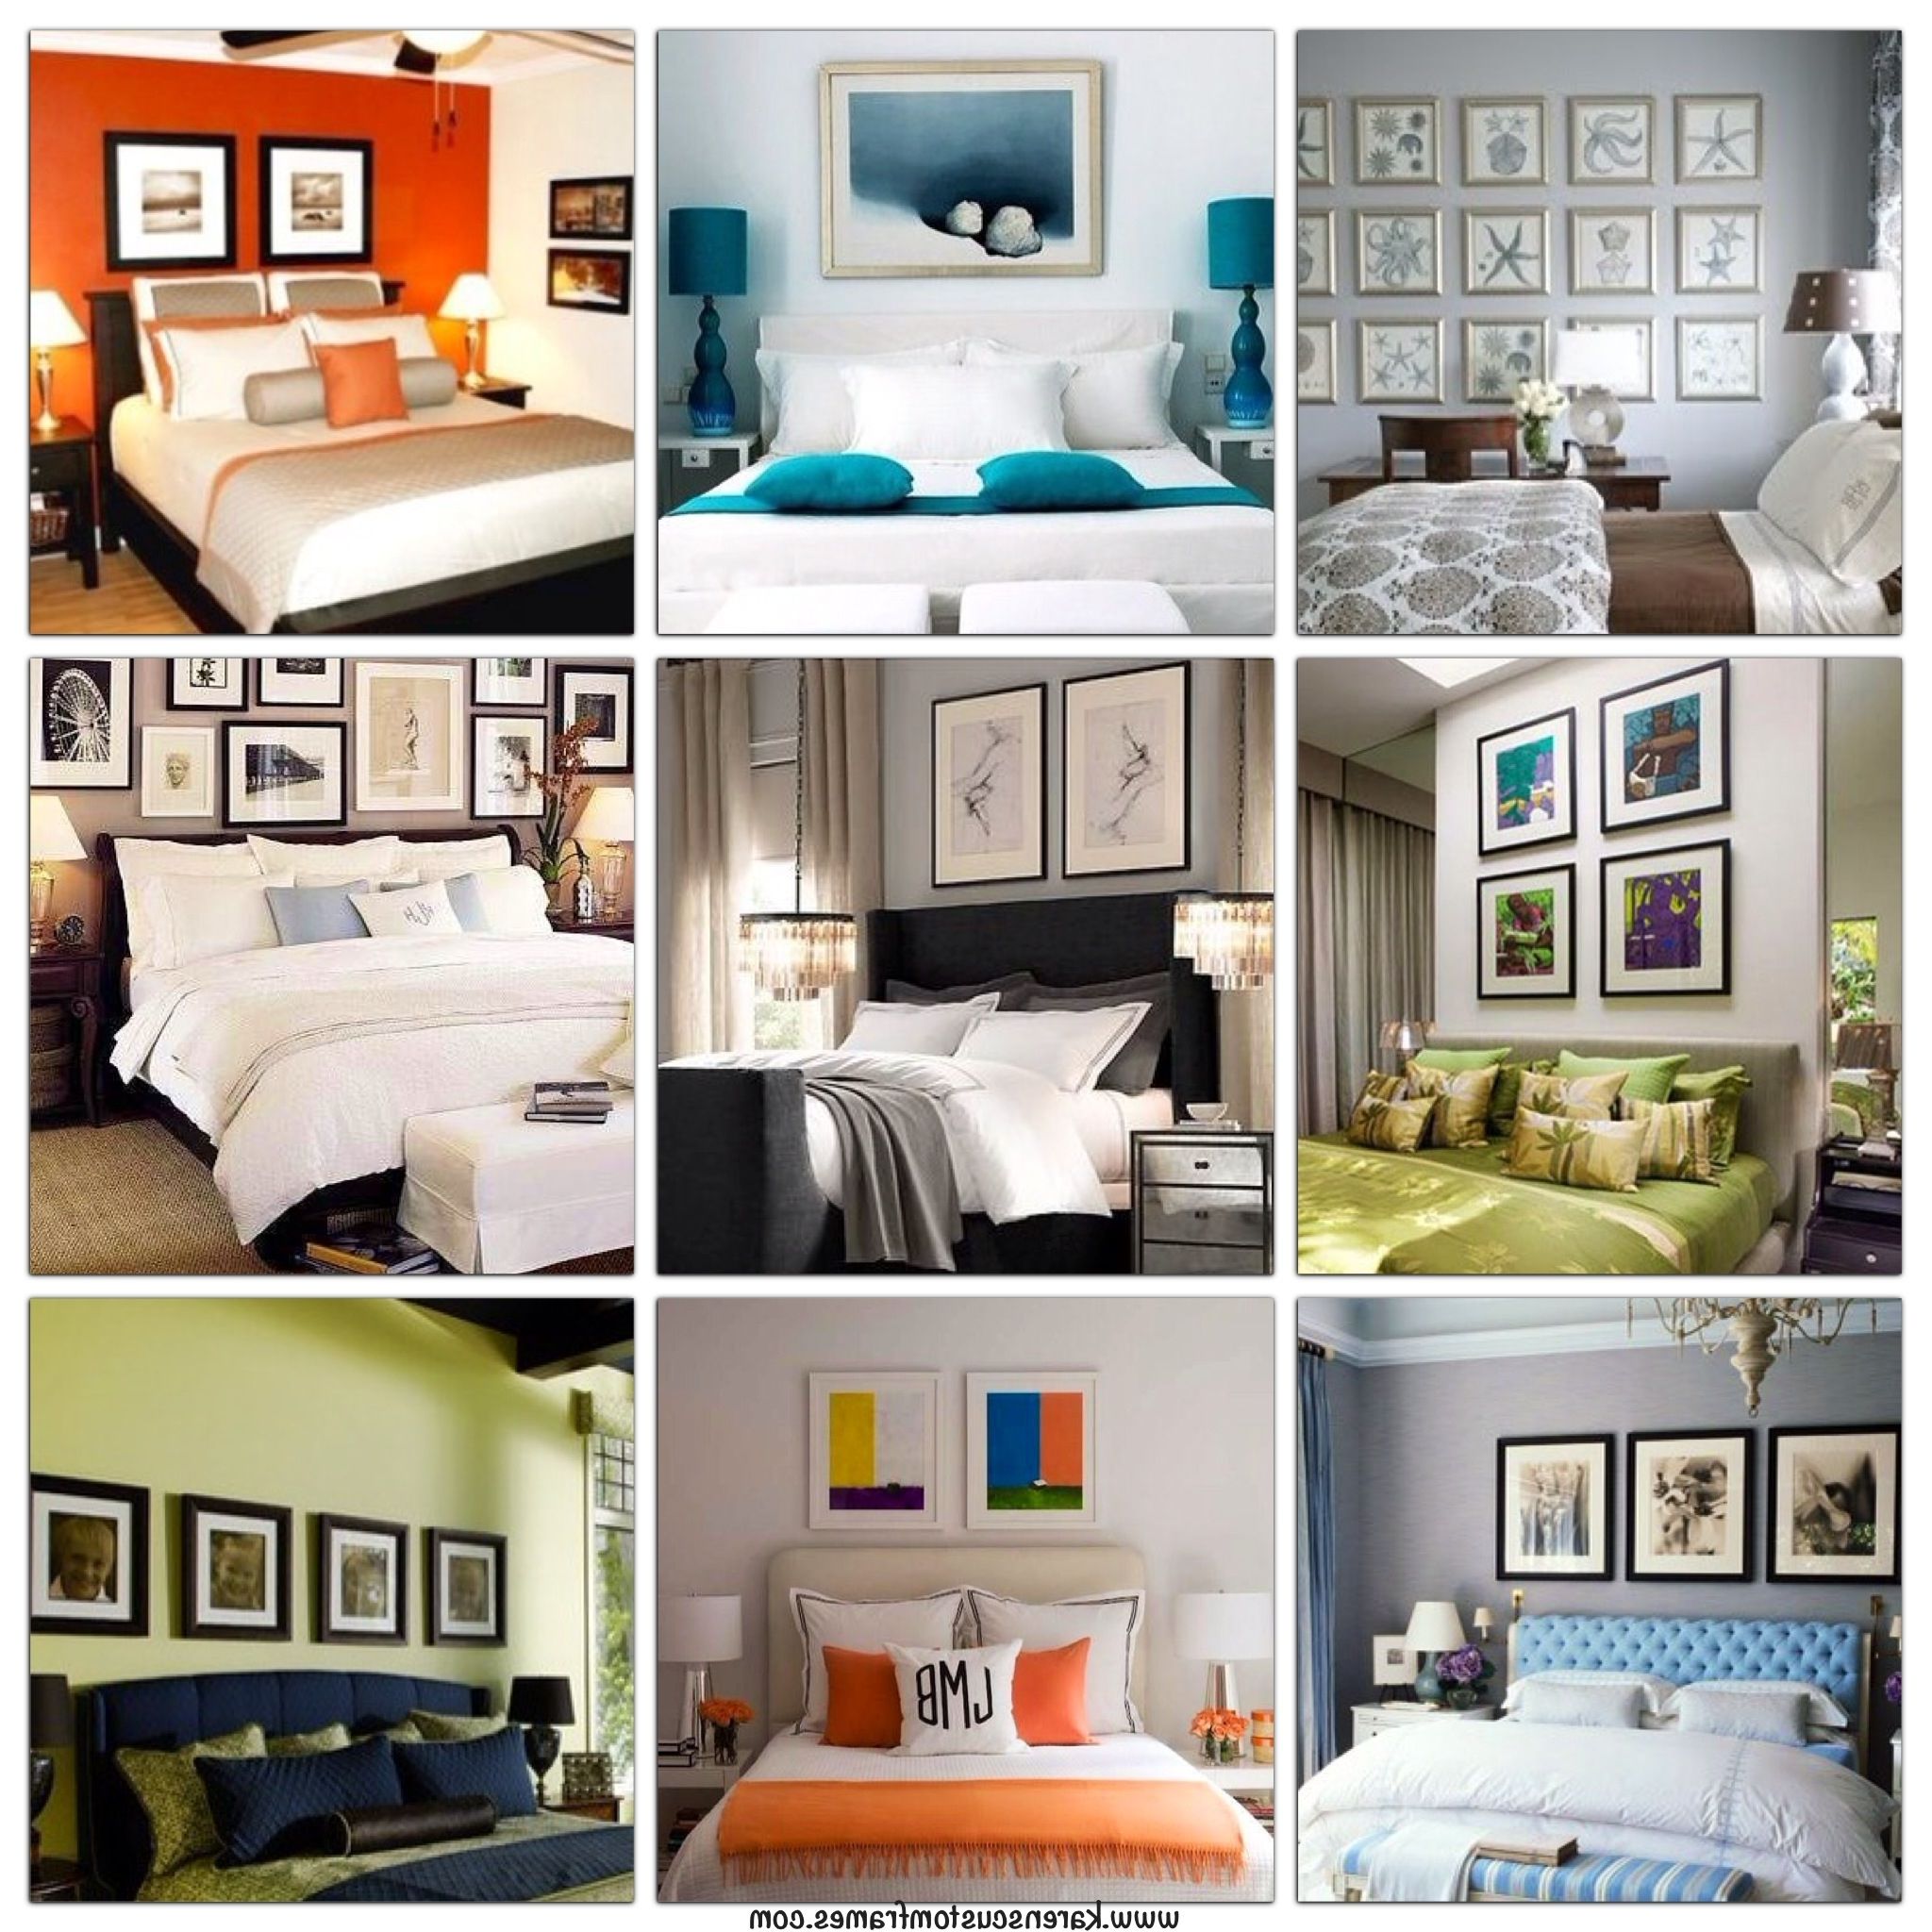 Widely Used Wall Art Ideas Design : Contemporary Archives Bedroom Framed Wall Intended For Framed Art Prints For Bedroom (View 1 of 15)